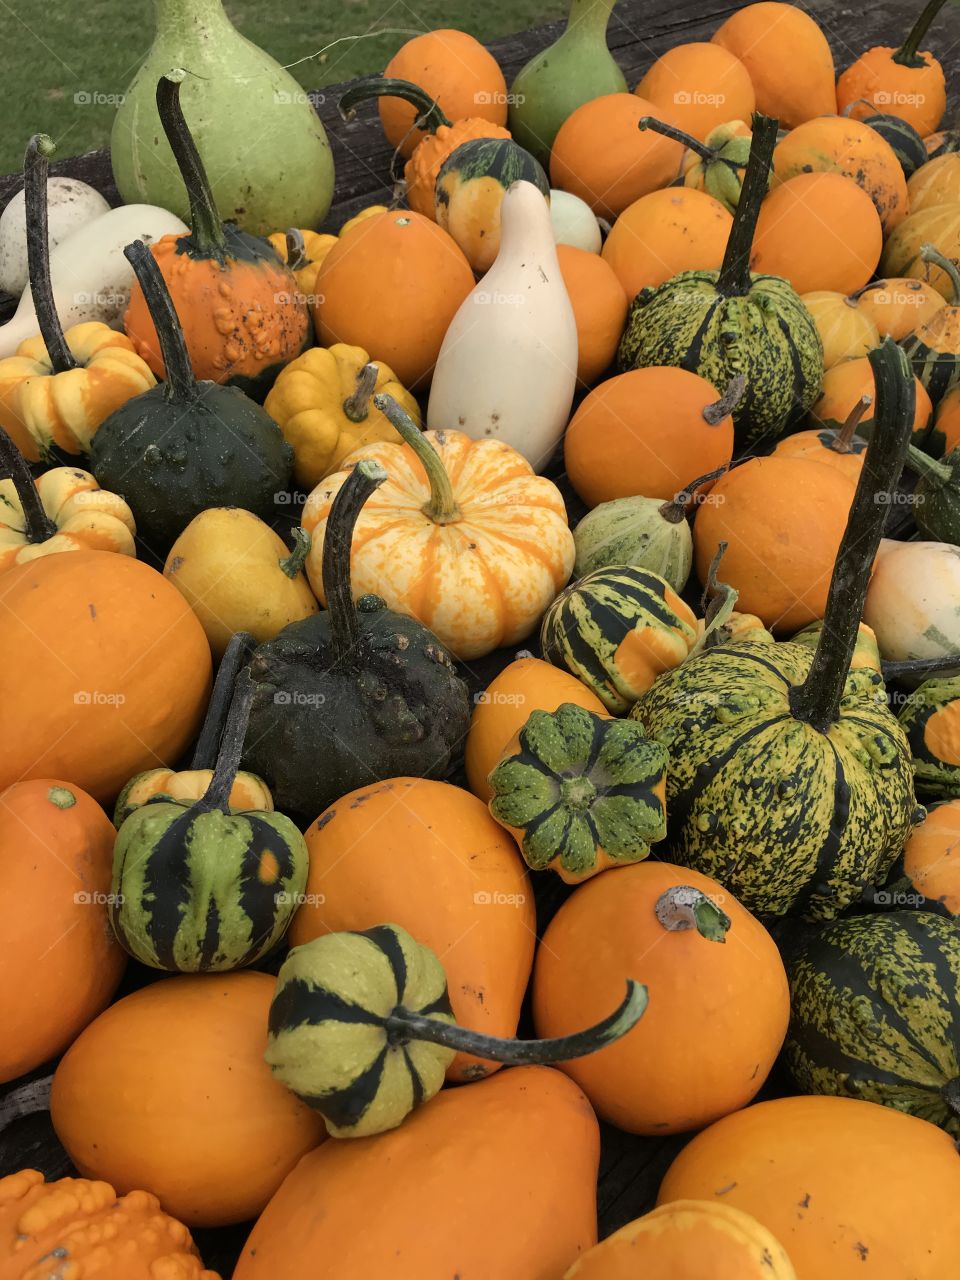 Tons of gourds!  Fall is here!